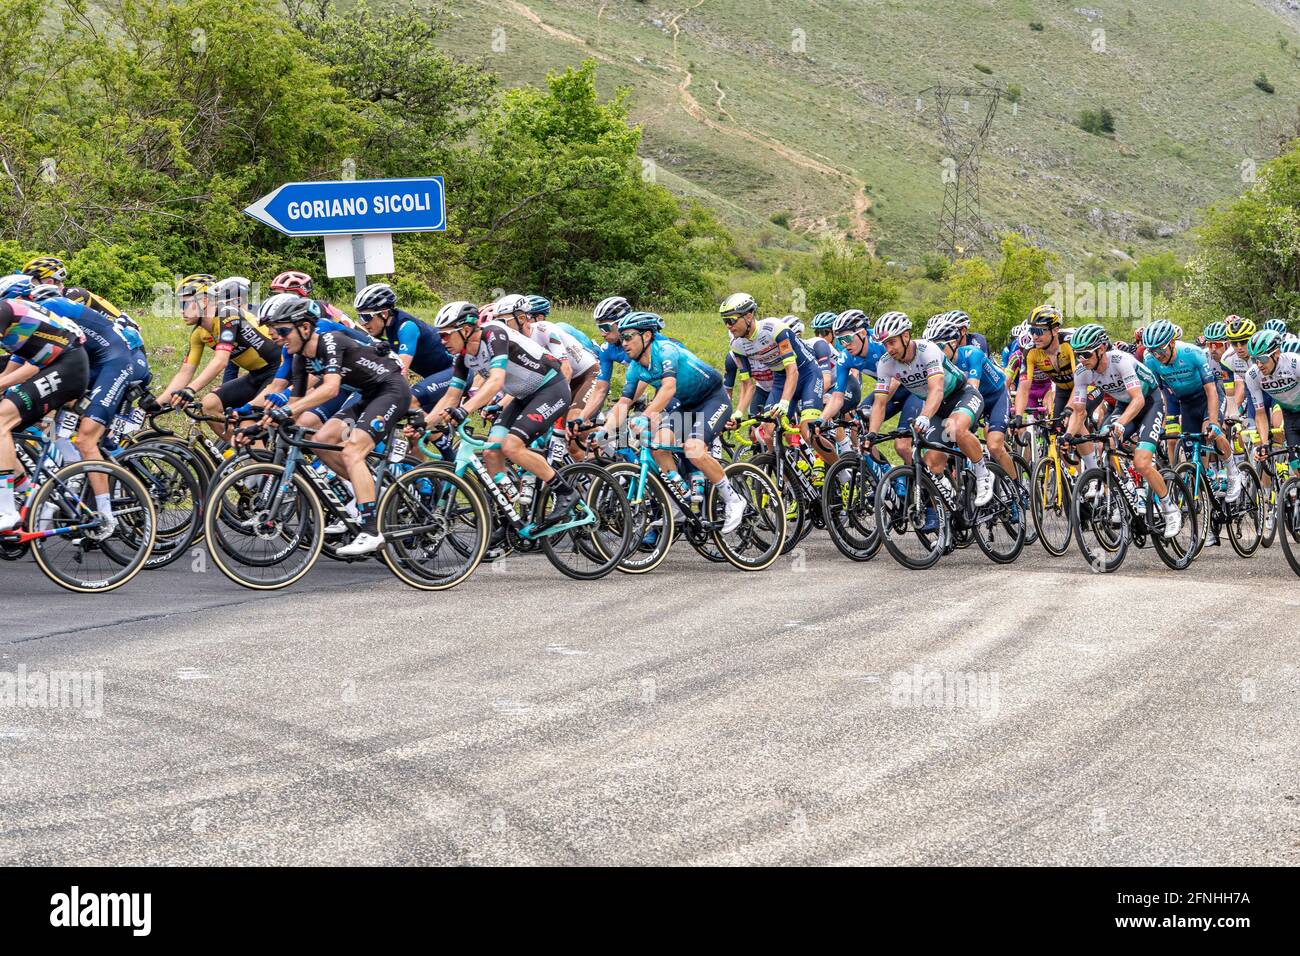 Mountain stage in Abruzzo of the Giro d'Italia. Group of cyclists in the race. Abruzzo, italy, europe Stock Photo